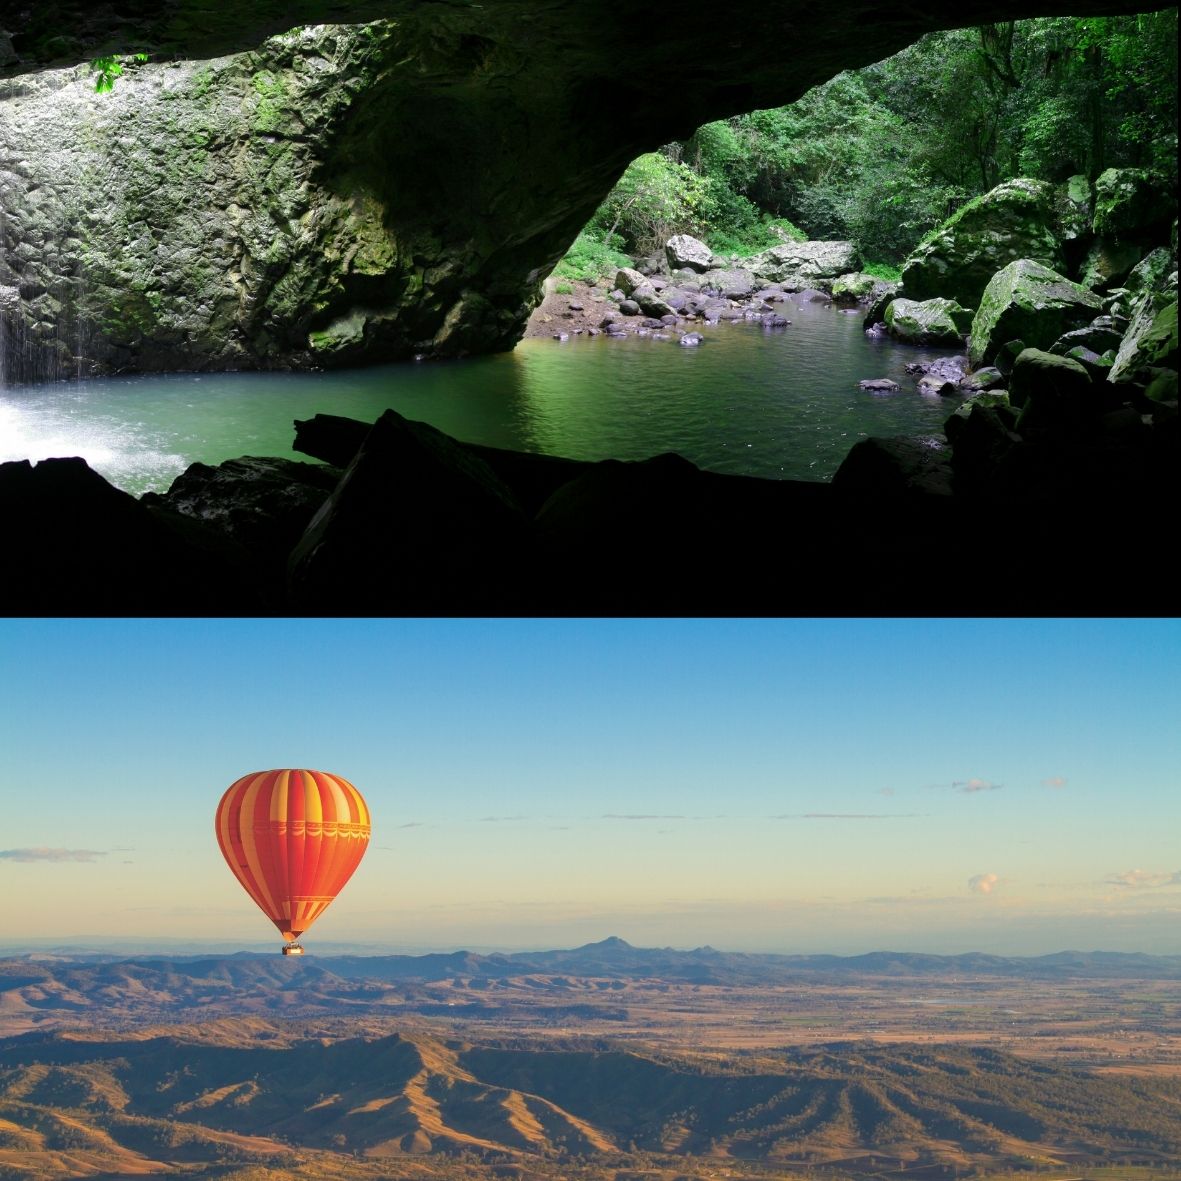 Natural Bridge Springbrook tour + Hot Air Balloon - Save $50 includes champagne breakfast and FREE photo pack 